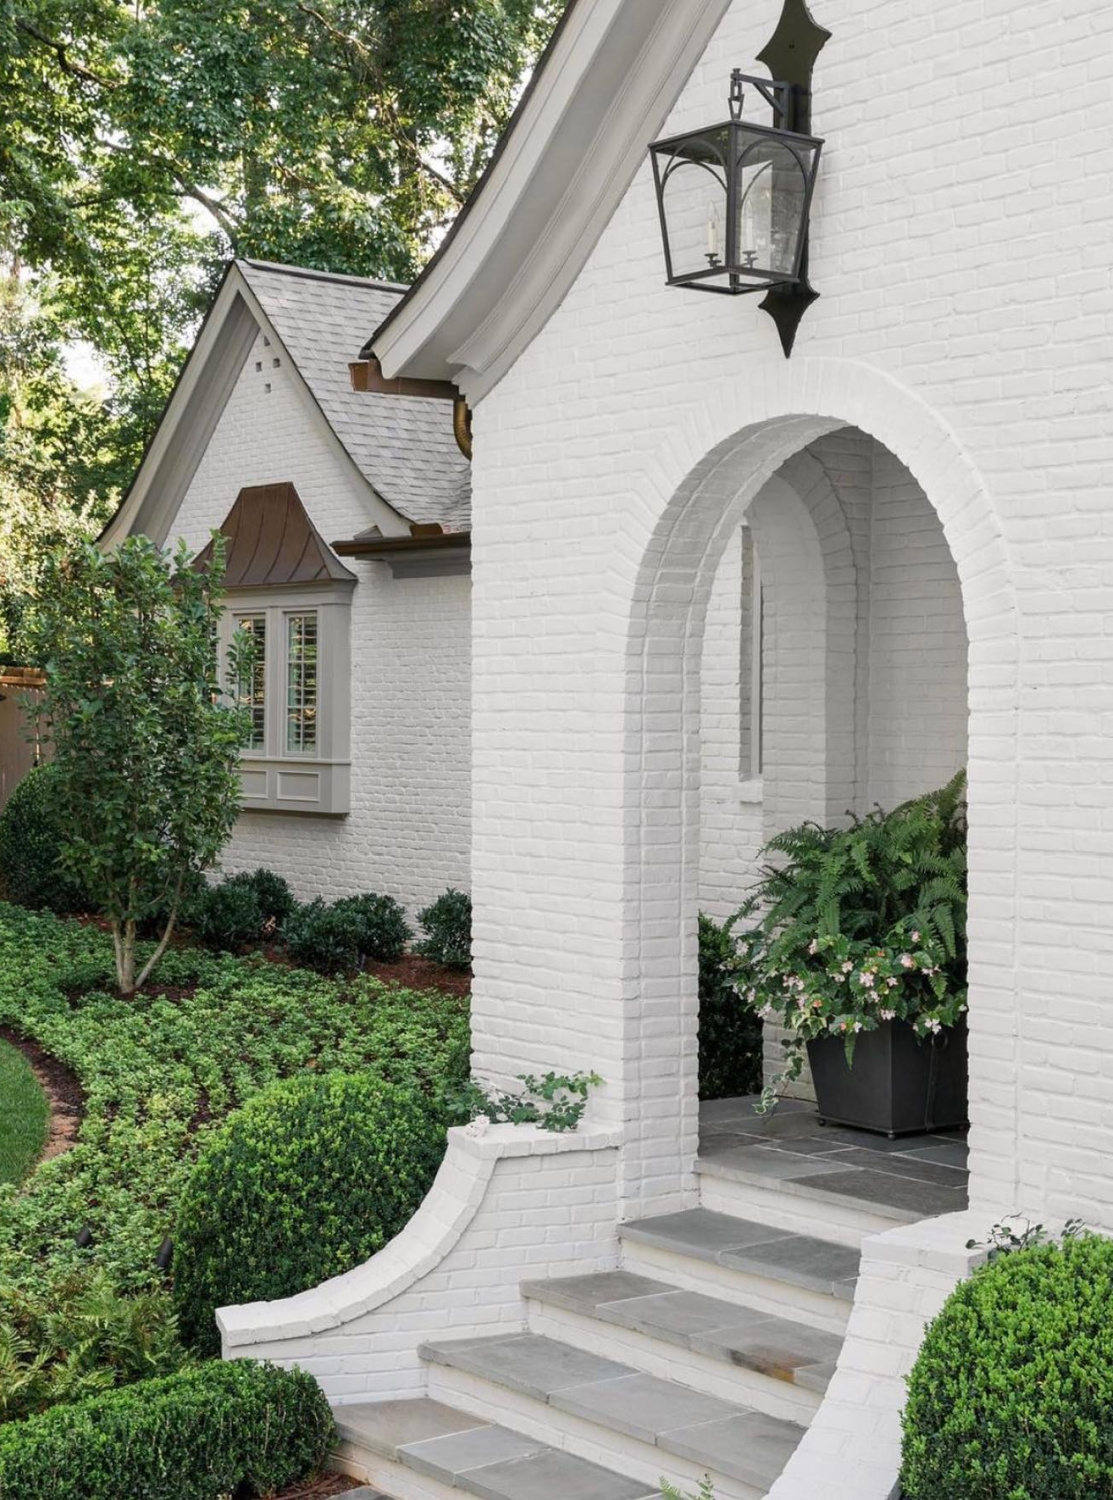 Balboa Mist (Benjamin Moore) on brick exterior of a lovely home with arches (Ladisic Fine Homes) - Sherry Hart. #balboamist #benjaminmoorebalboamist #paintcolors #housecolors